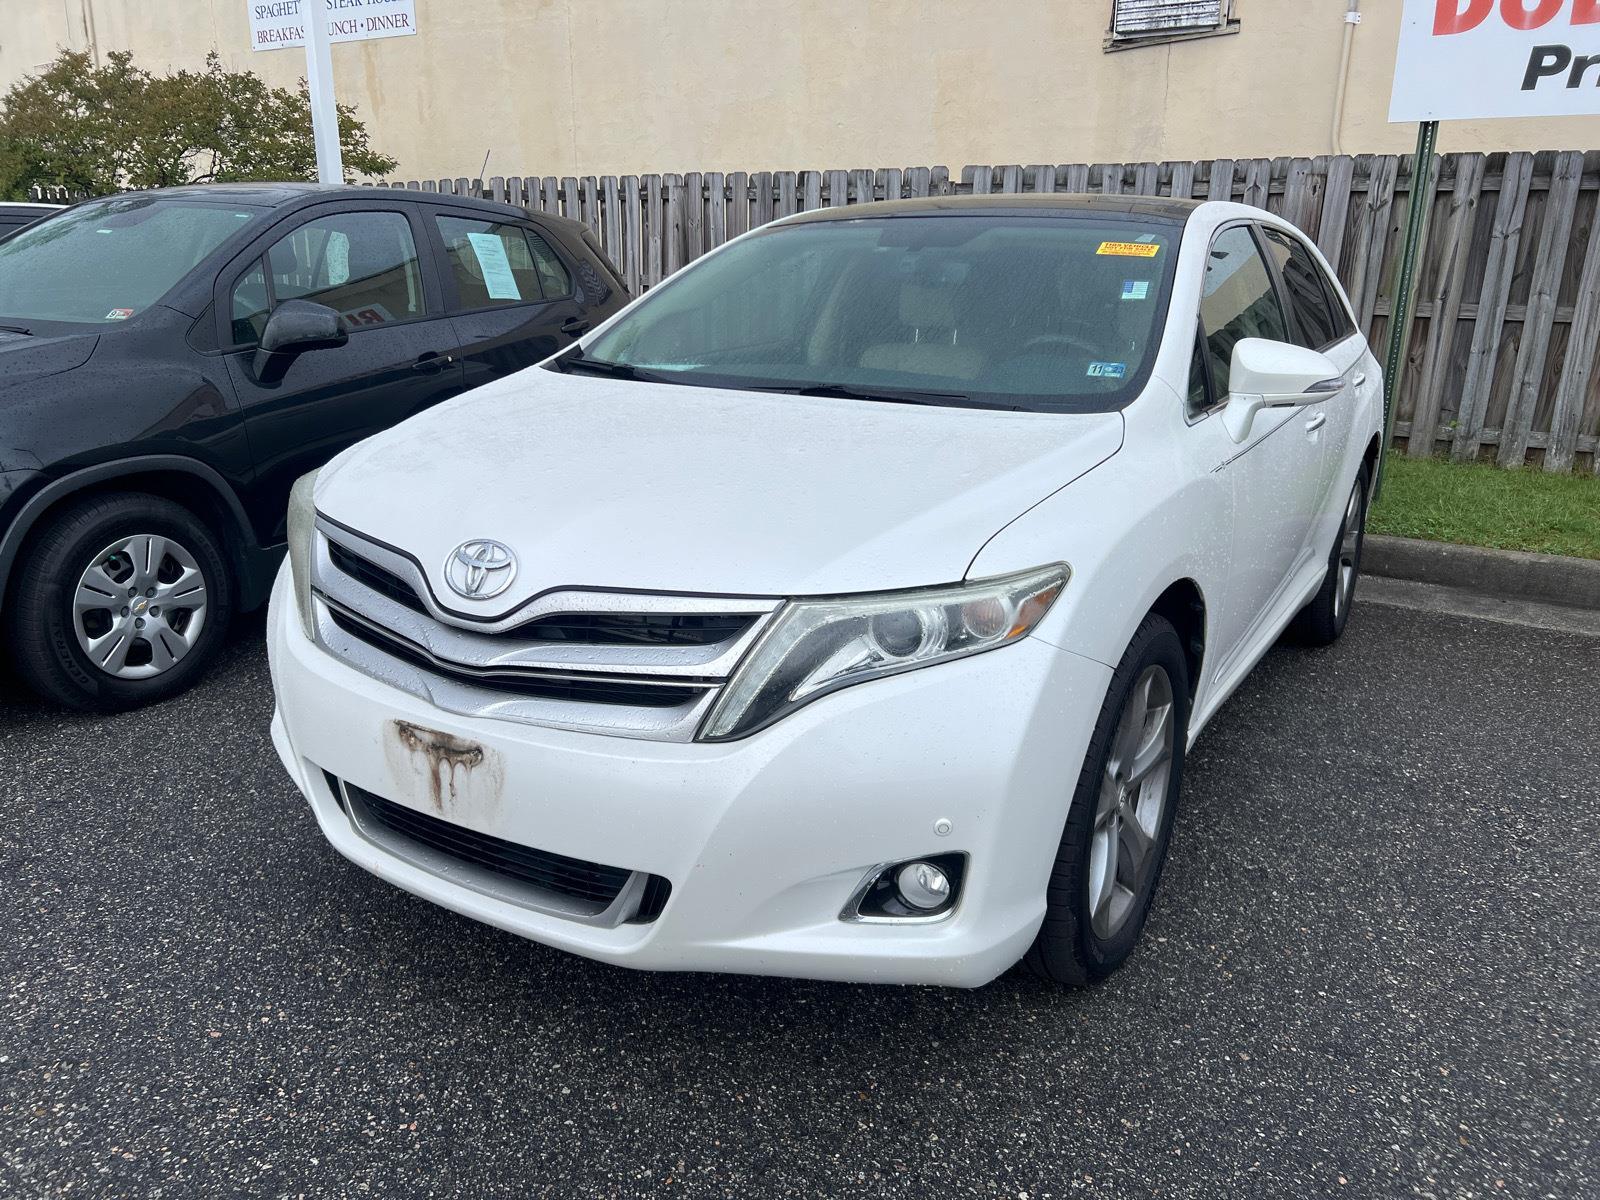 2015 TOYOTA Venza Limited Wagon 4 Dr. All Wheel Drive